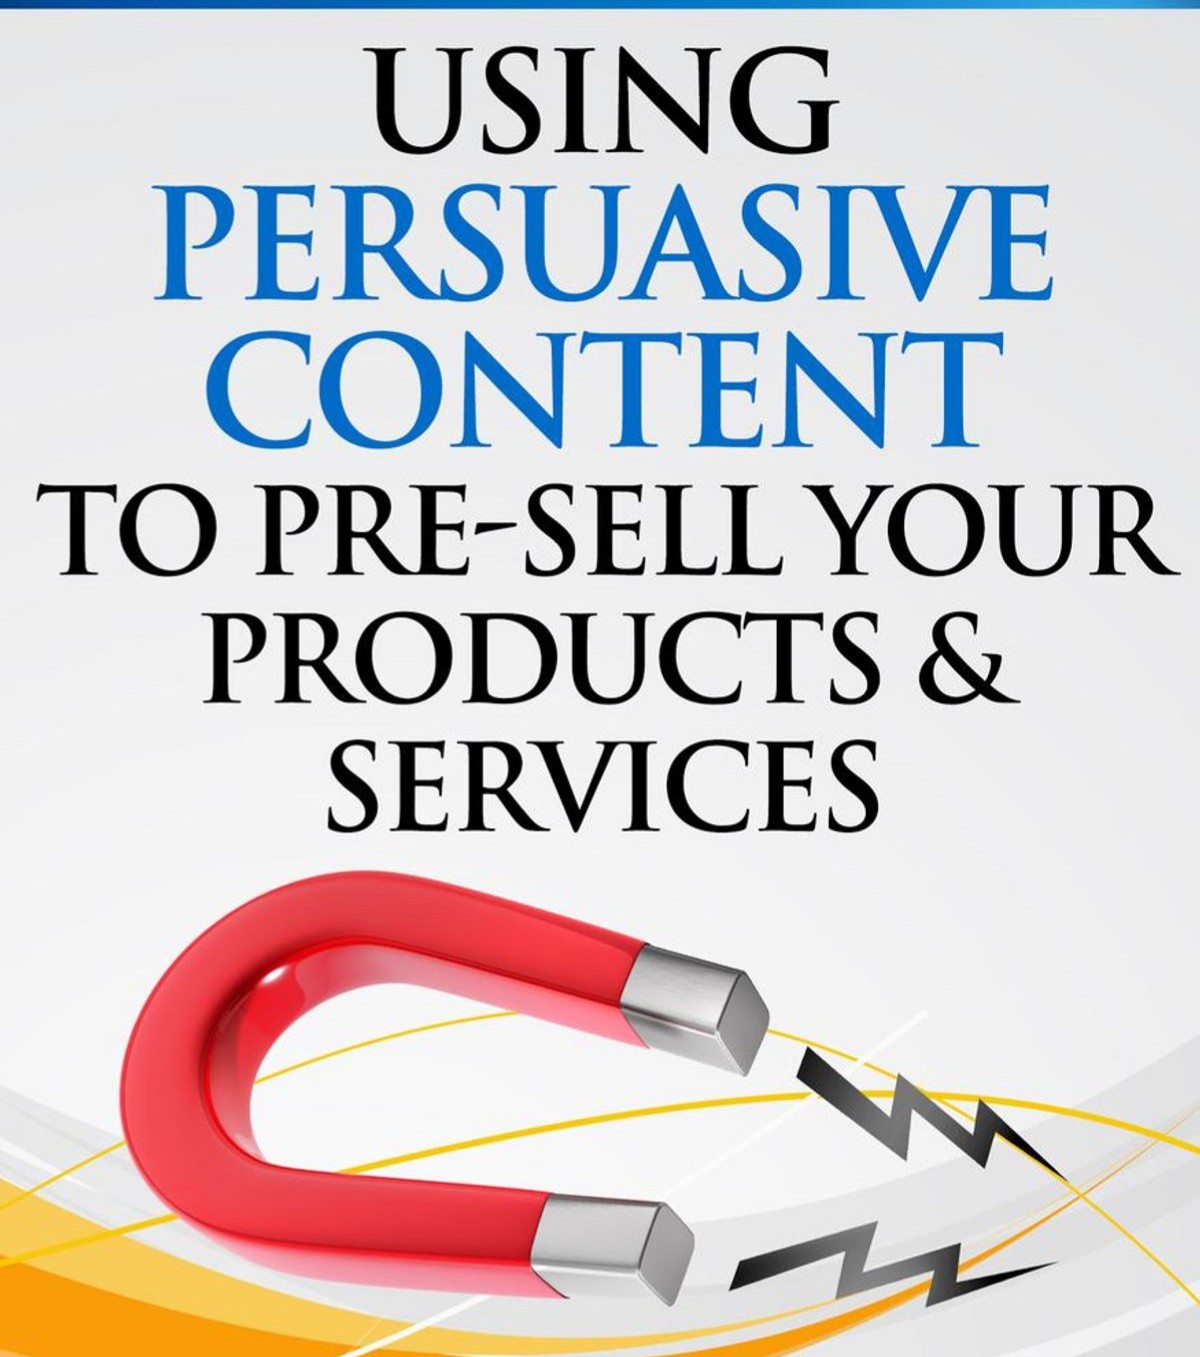 USING
PERSUASIVE
CONTENT
TO PRE-SELL YOUR
PRODUCTS &amp;
SERVICES

Ce
V ~~